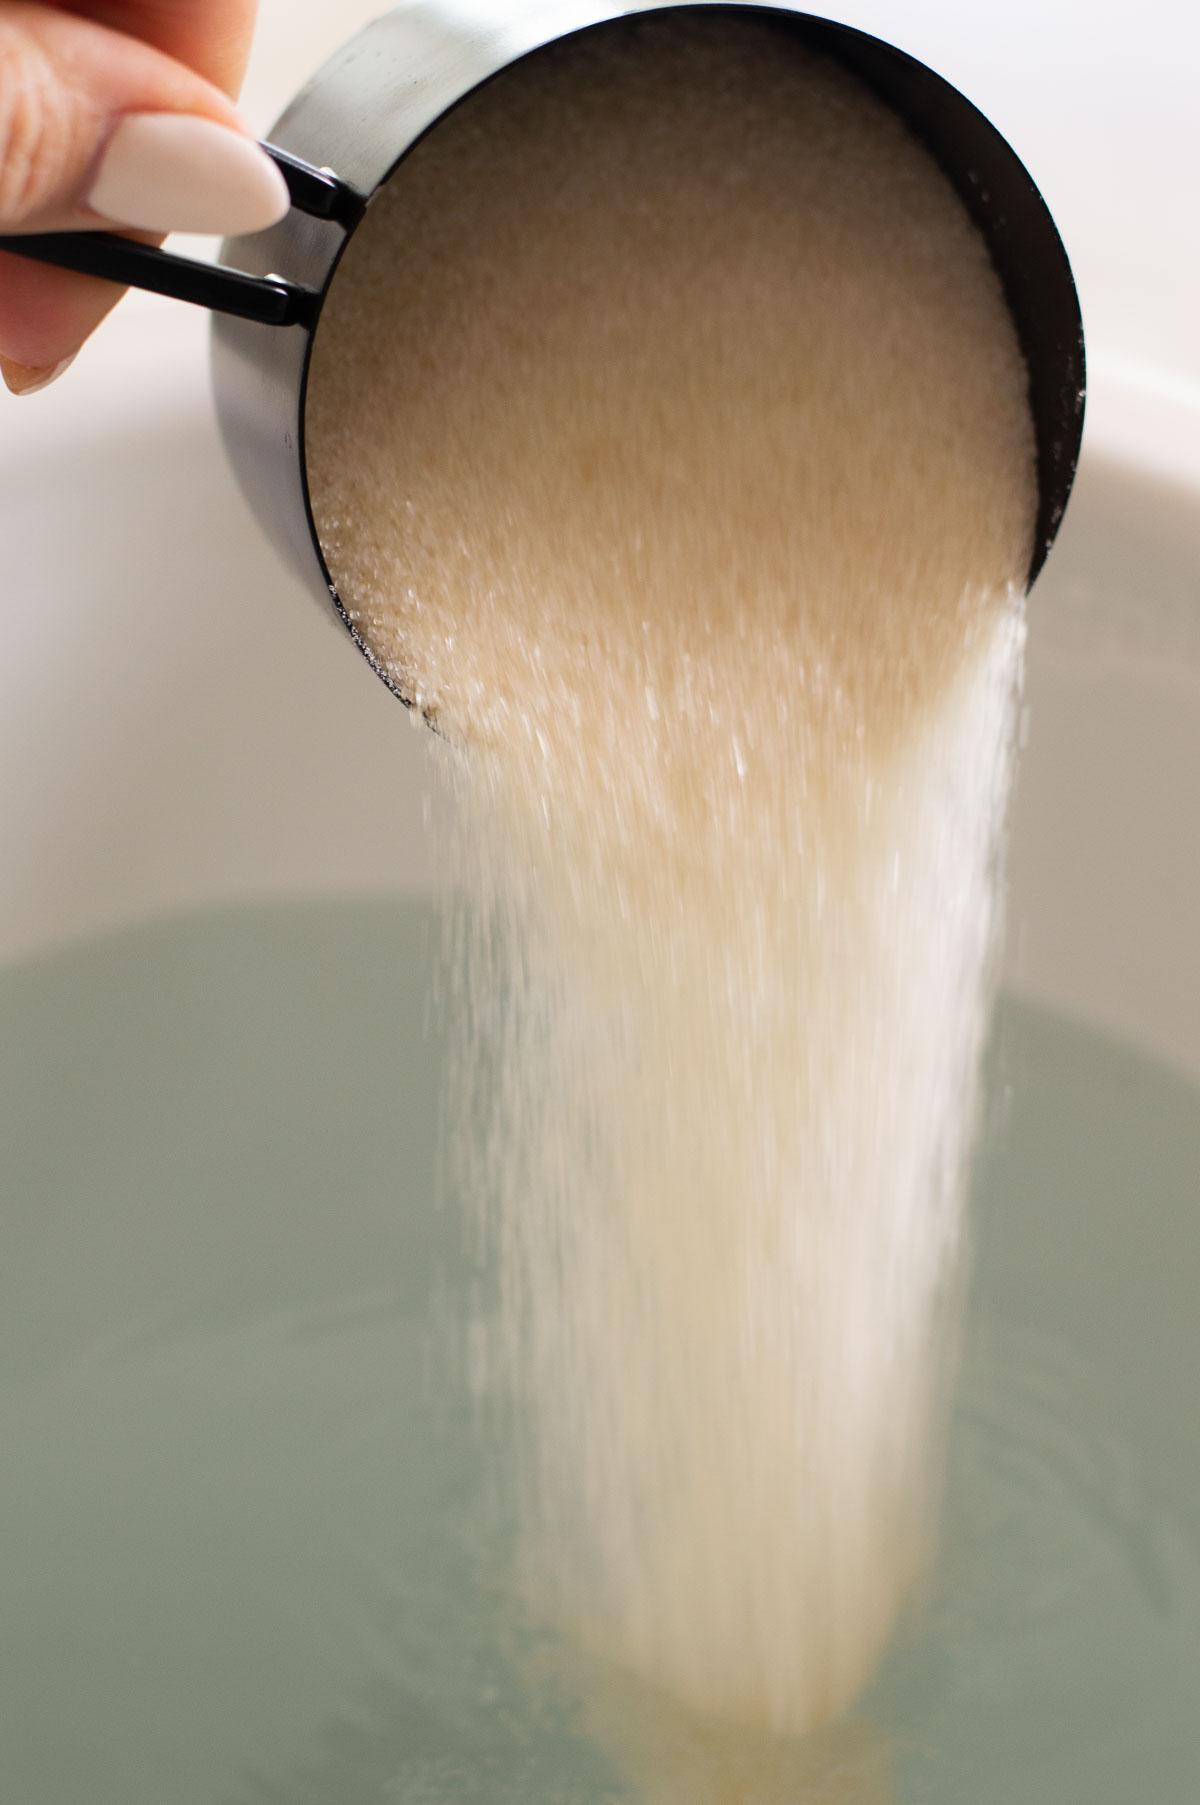 sugar being poured into a bowl of water